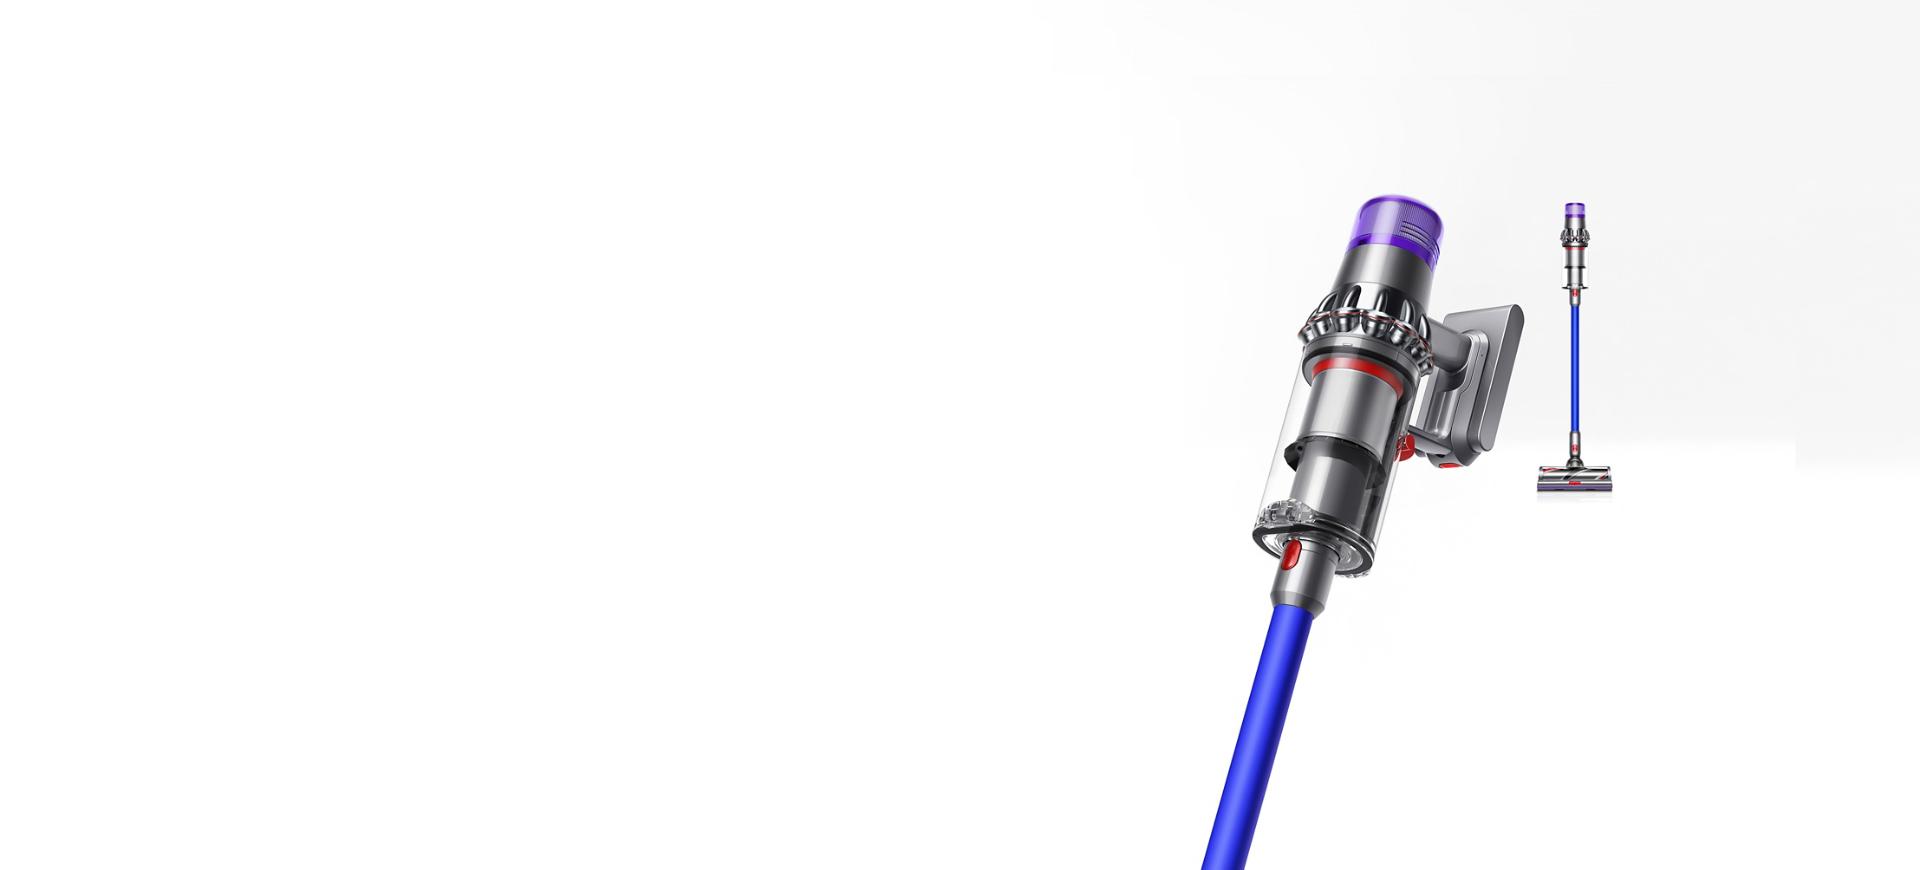 Dyson V11 vacuum shown in both full view and close-up.